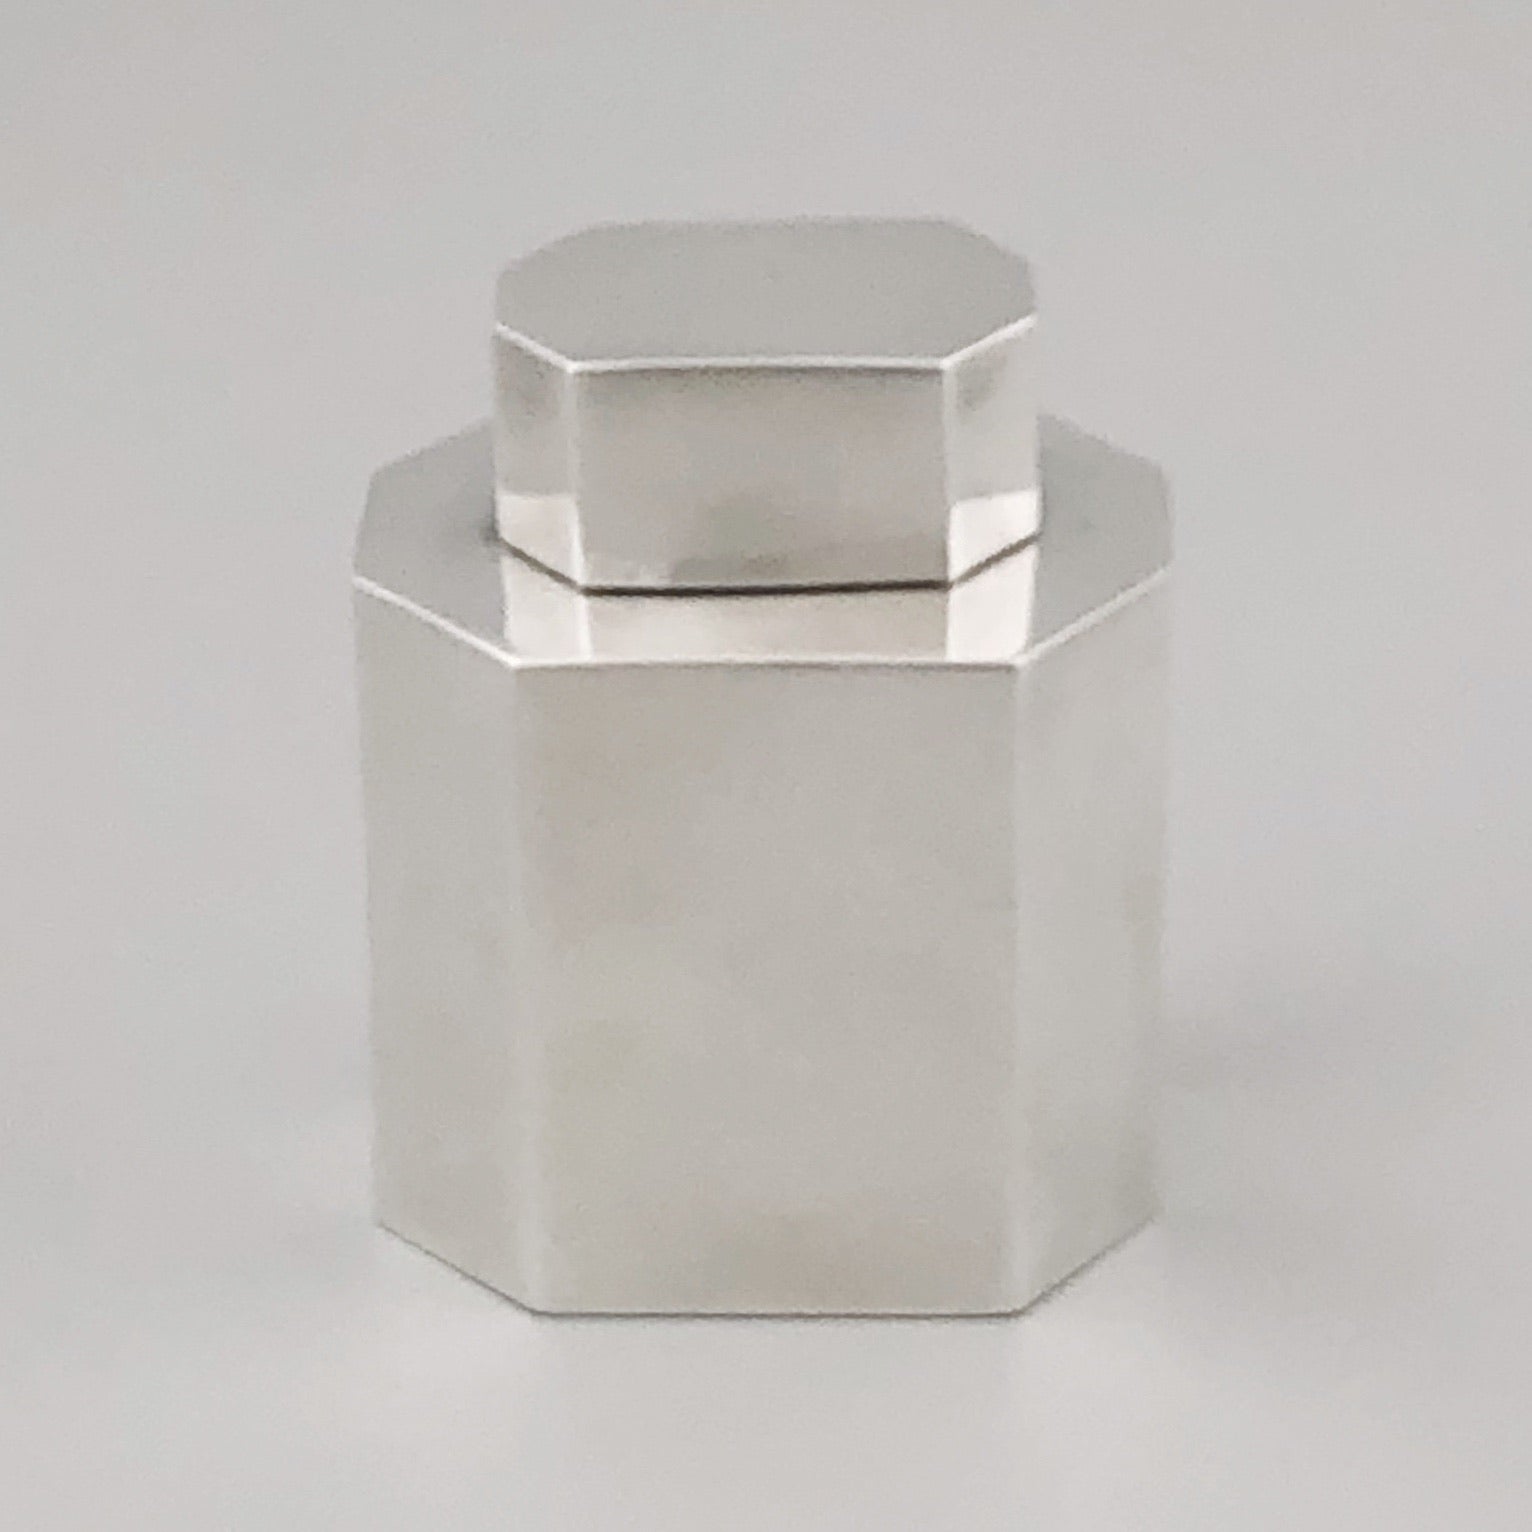 Sterling Silver Tea Canister / Caddy with Paneled Body, Gorham Manufacturing Company, Providence, RI, 20th Century - The Silver Vault of Charleston